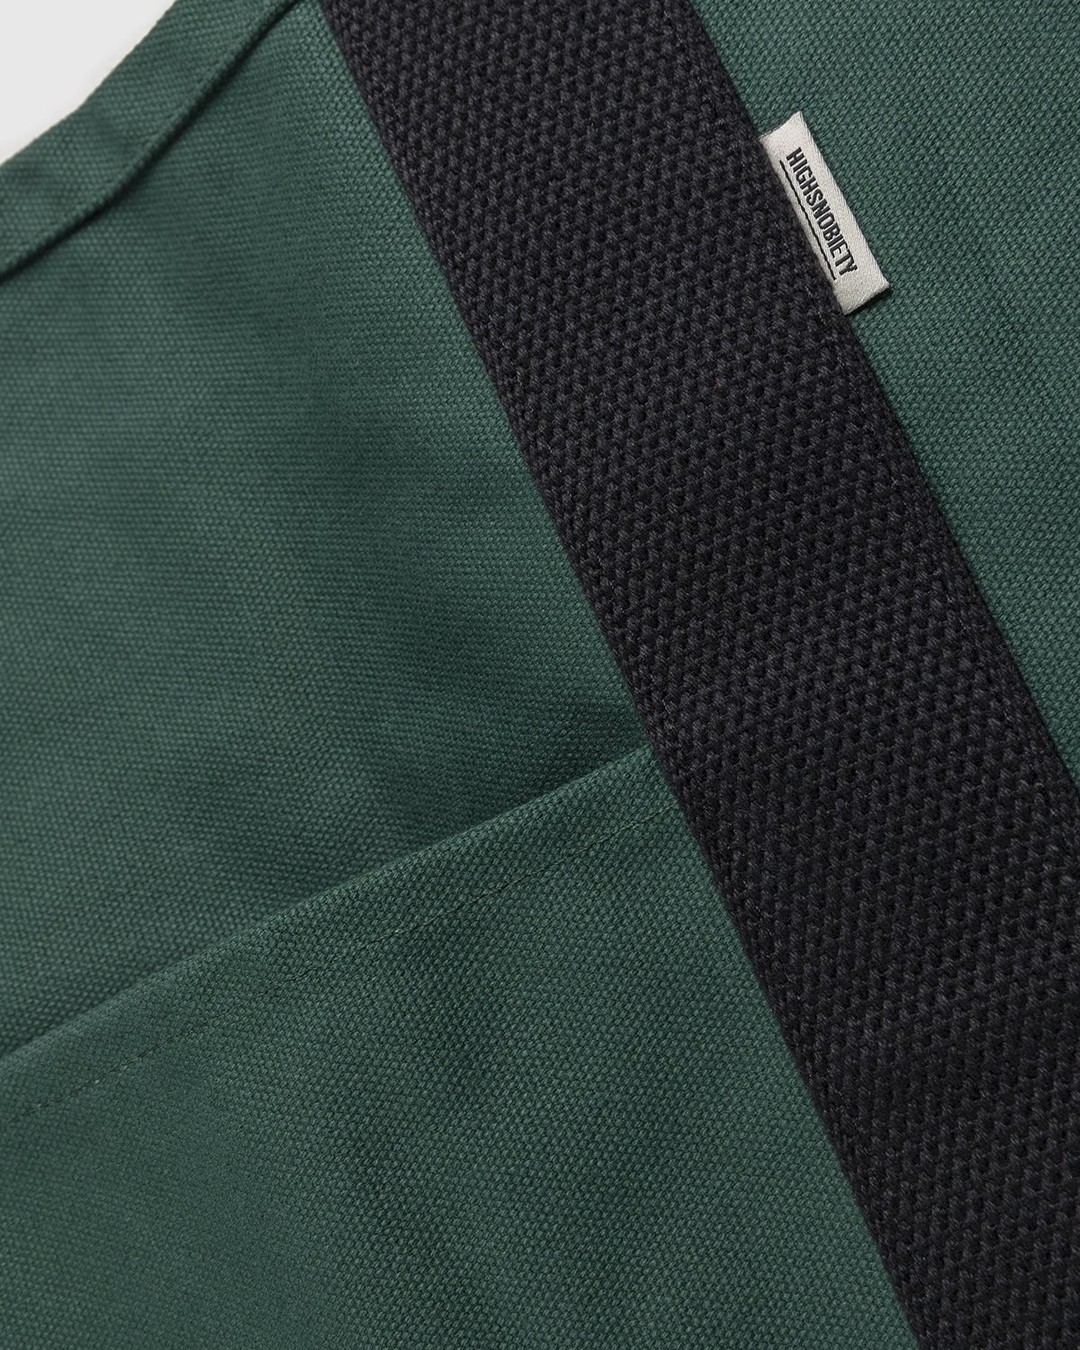 Highsnobiety – Large Staples Tote Bag Green - Tote Bags - Green - Image 3